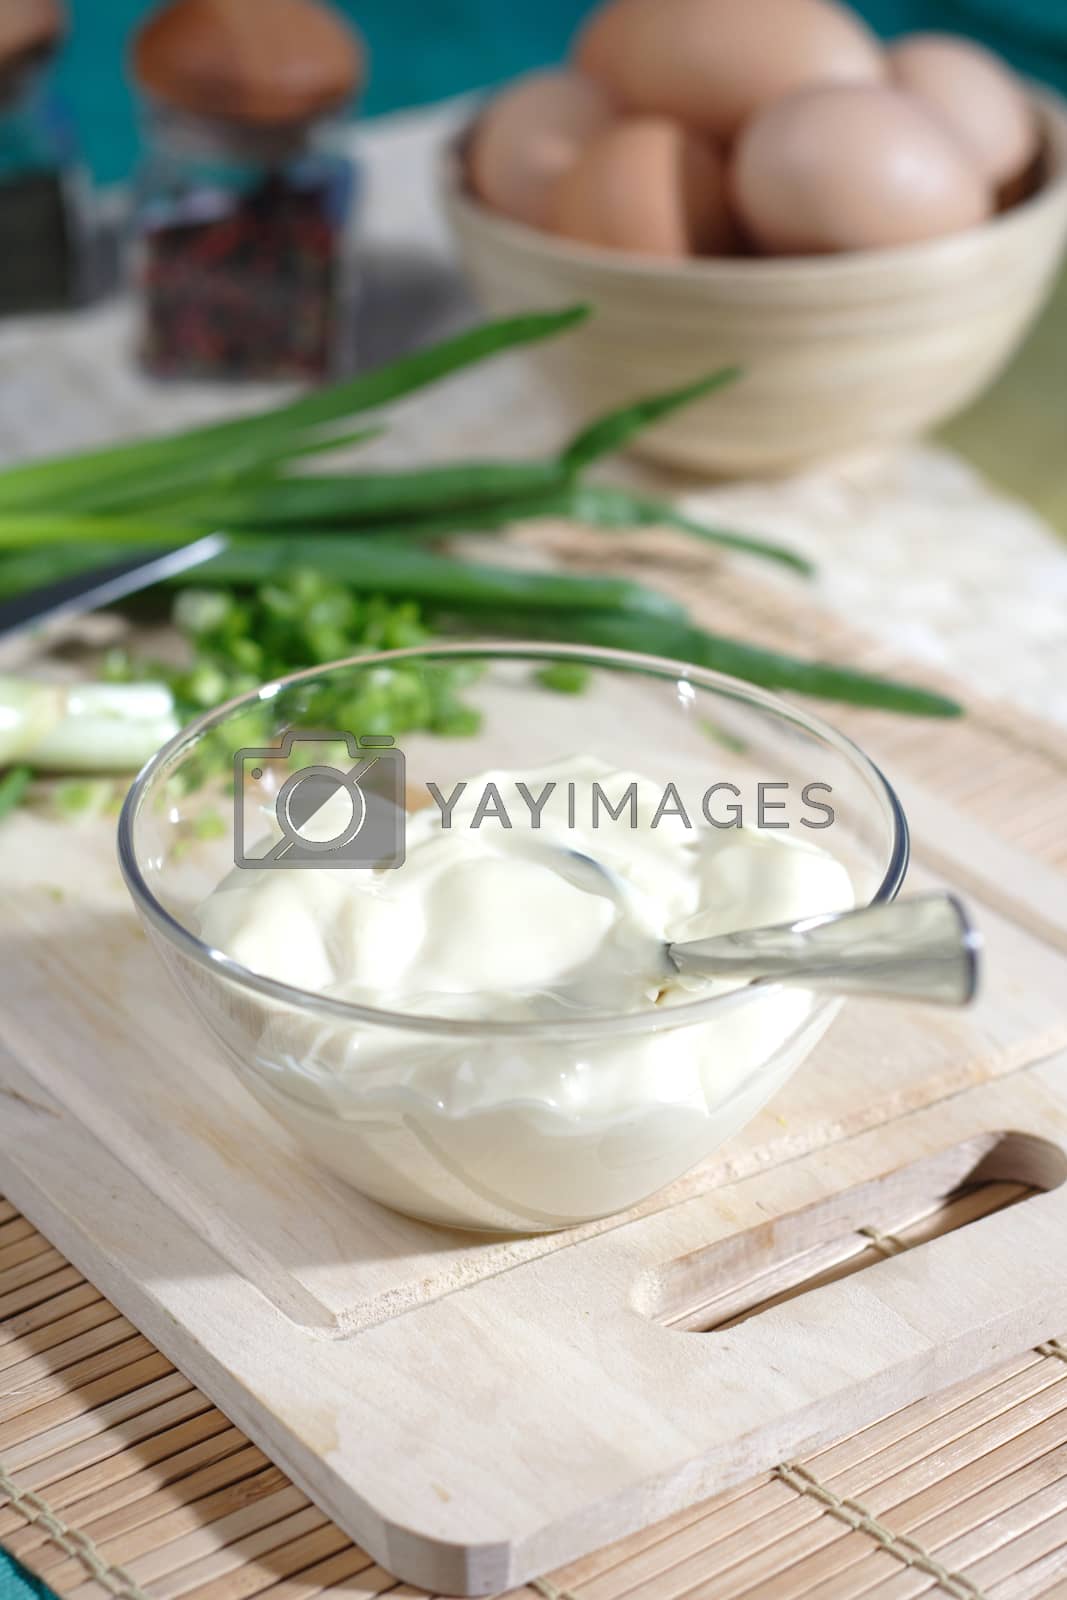 Royalty free image of Mayonnaise by moodboard